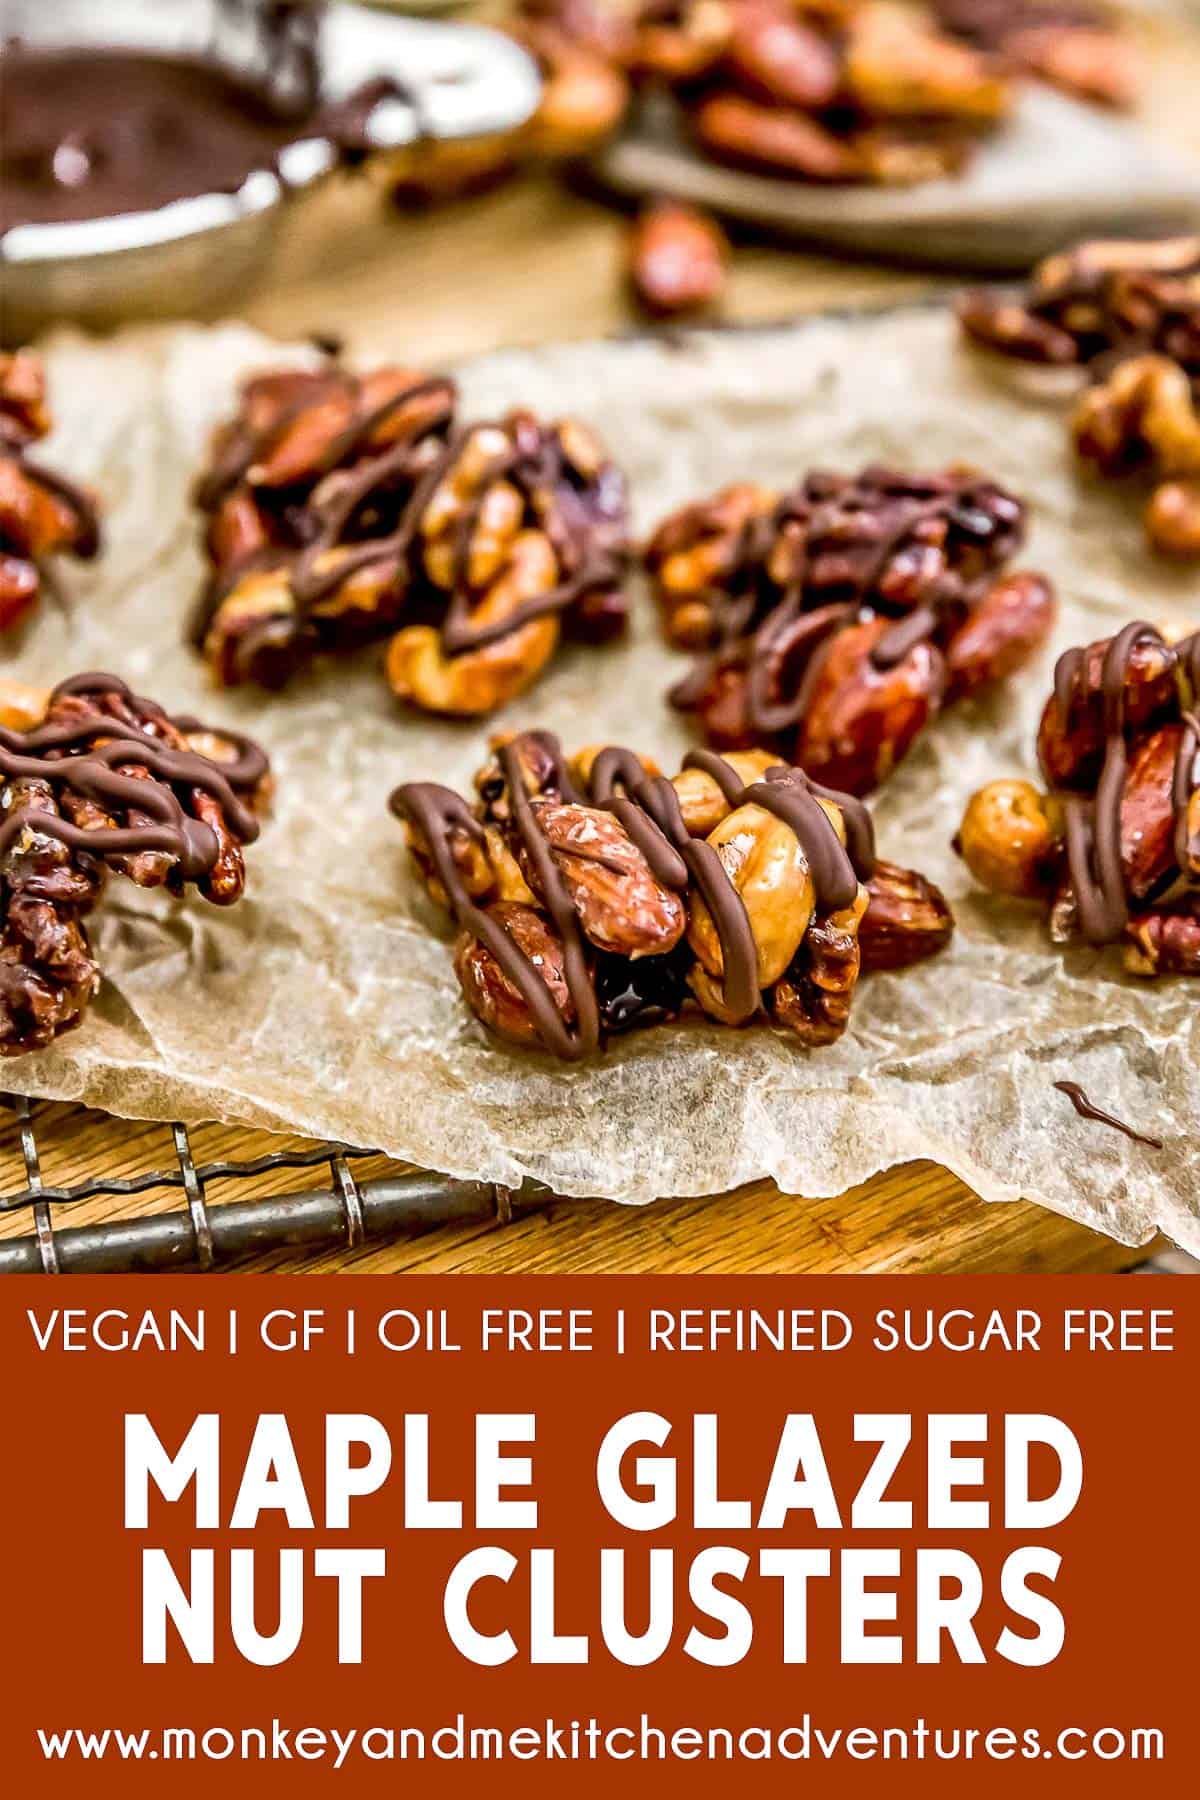 Maple Glazed Nut Clusters with text description